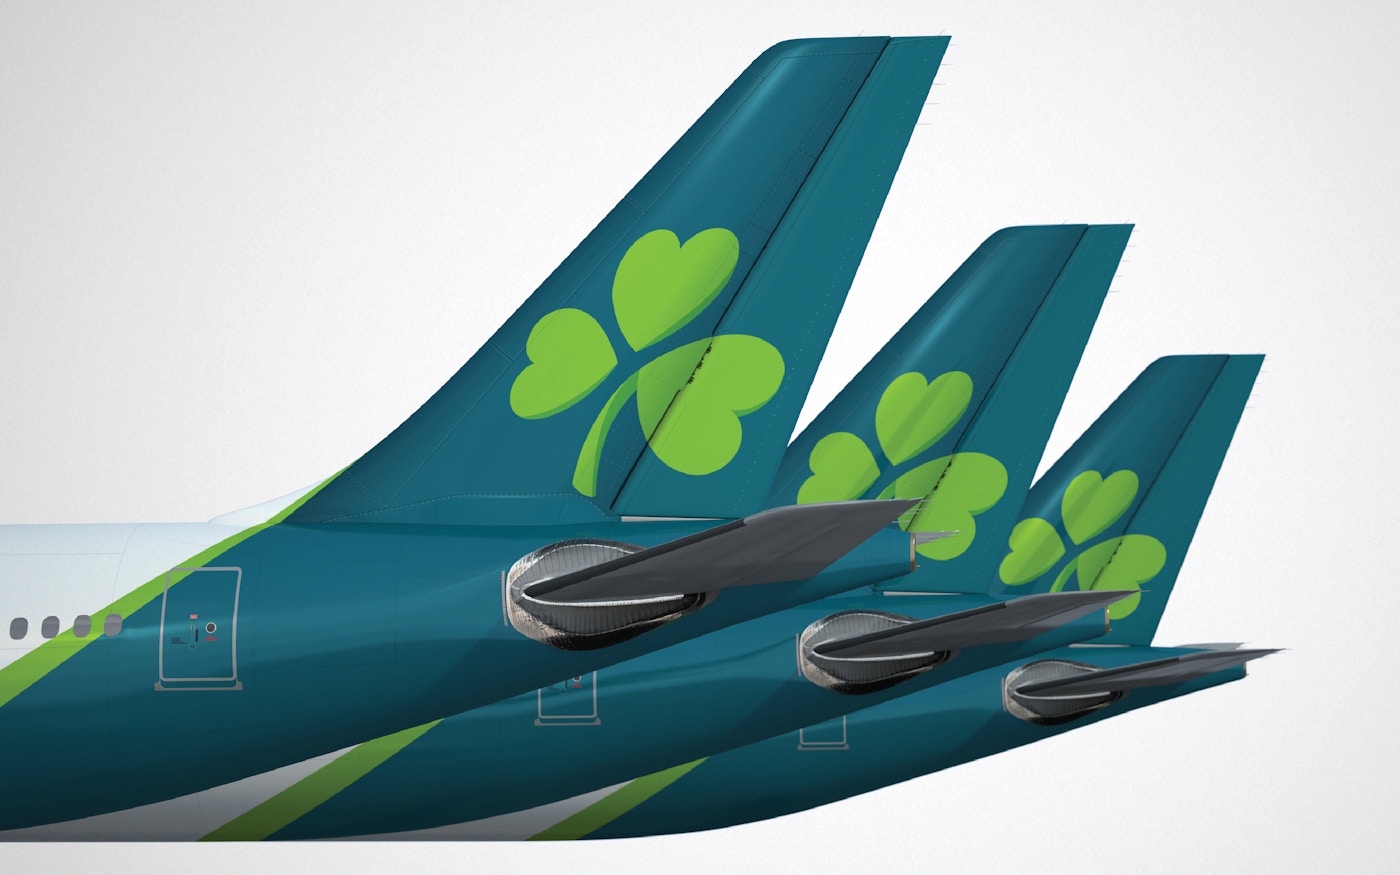 Aer Lingus livery with new logo